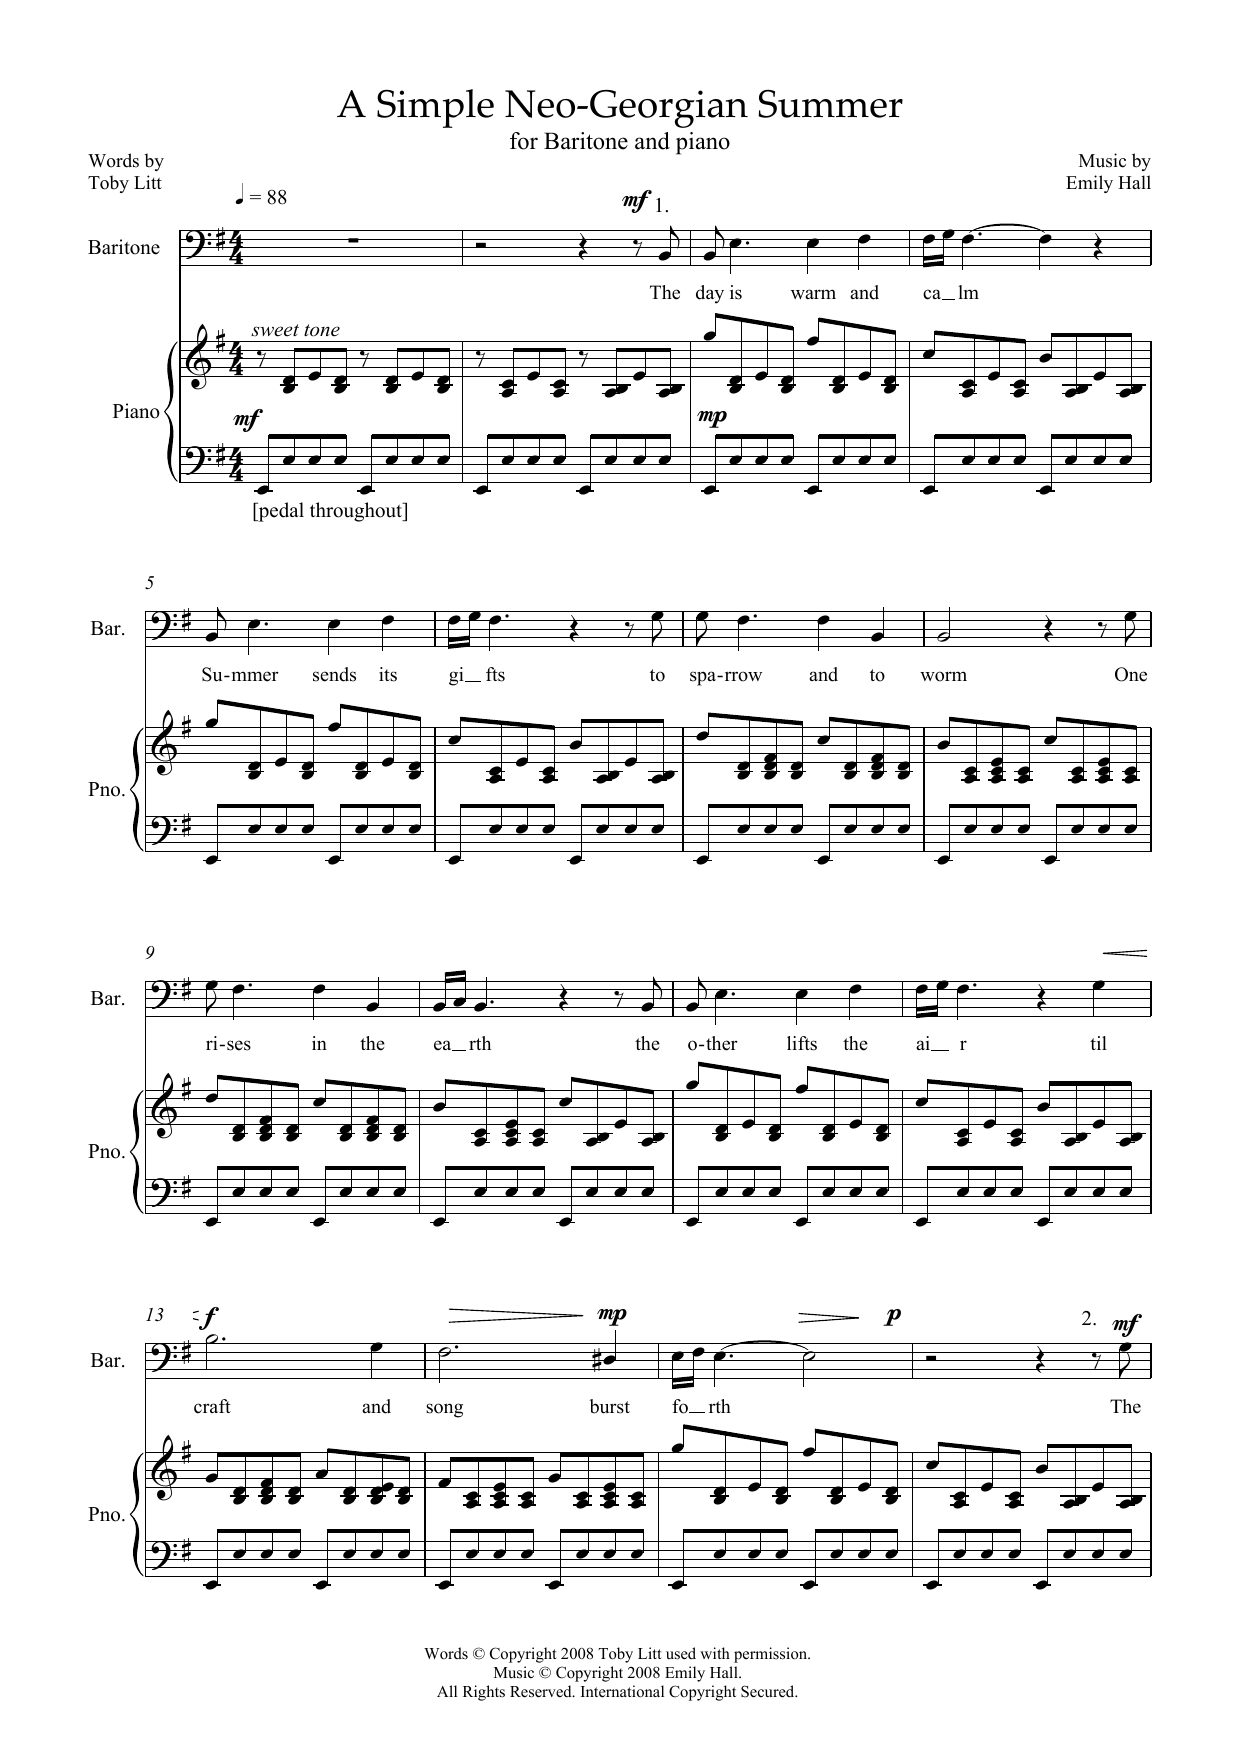 Download Emily Hall A Simple Neo-Georgian Summer (for barit Sheet Music